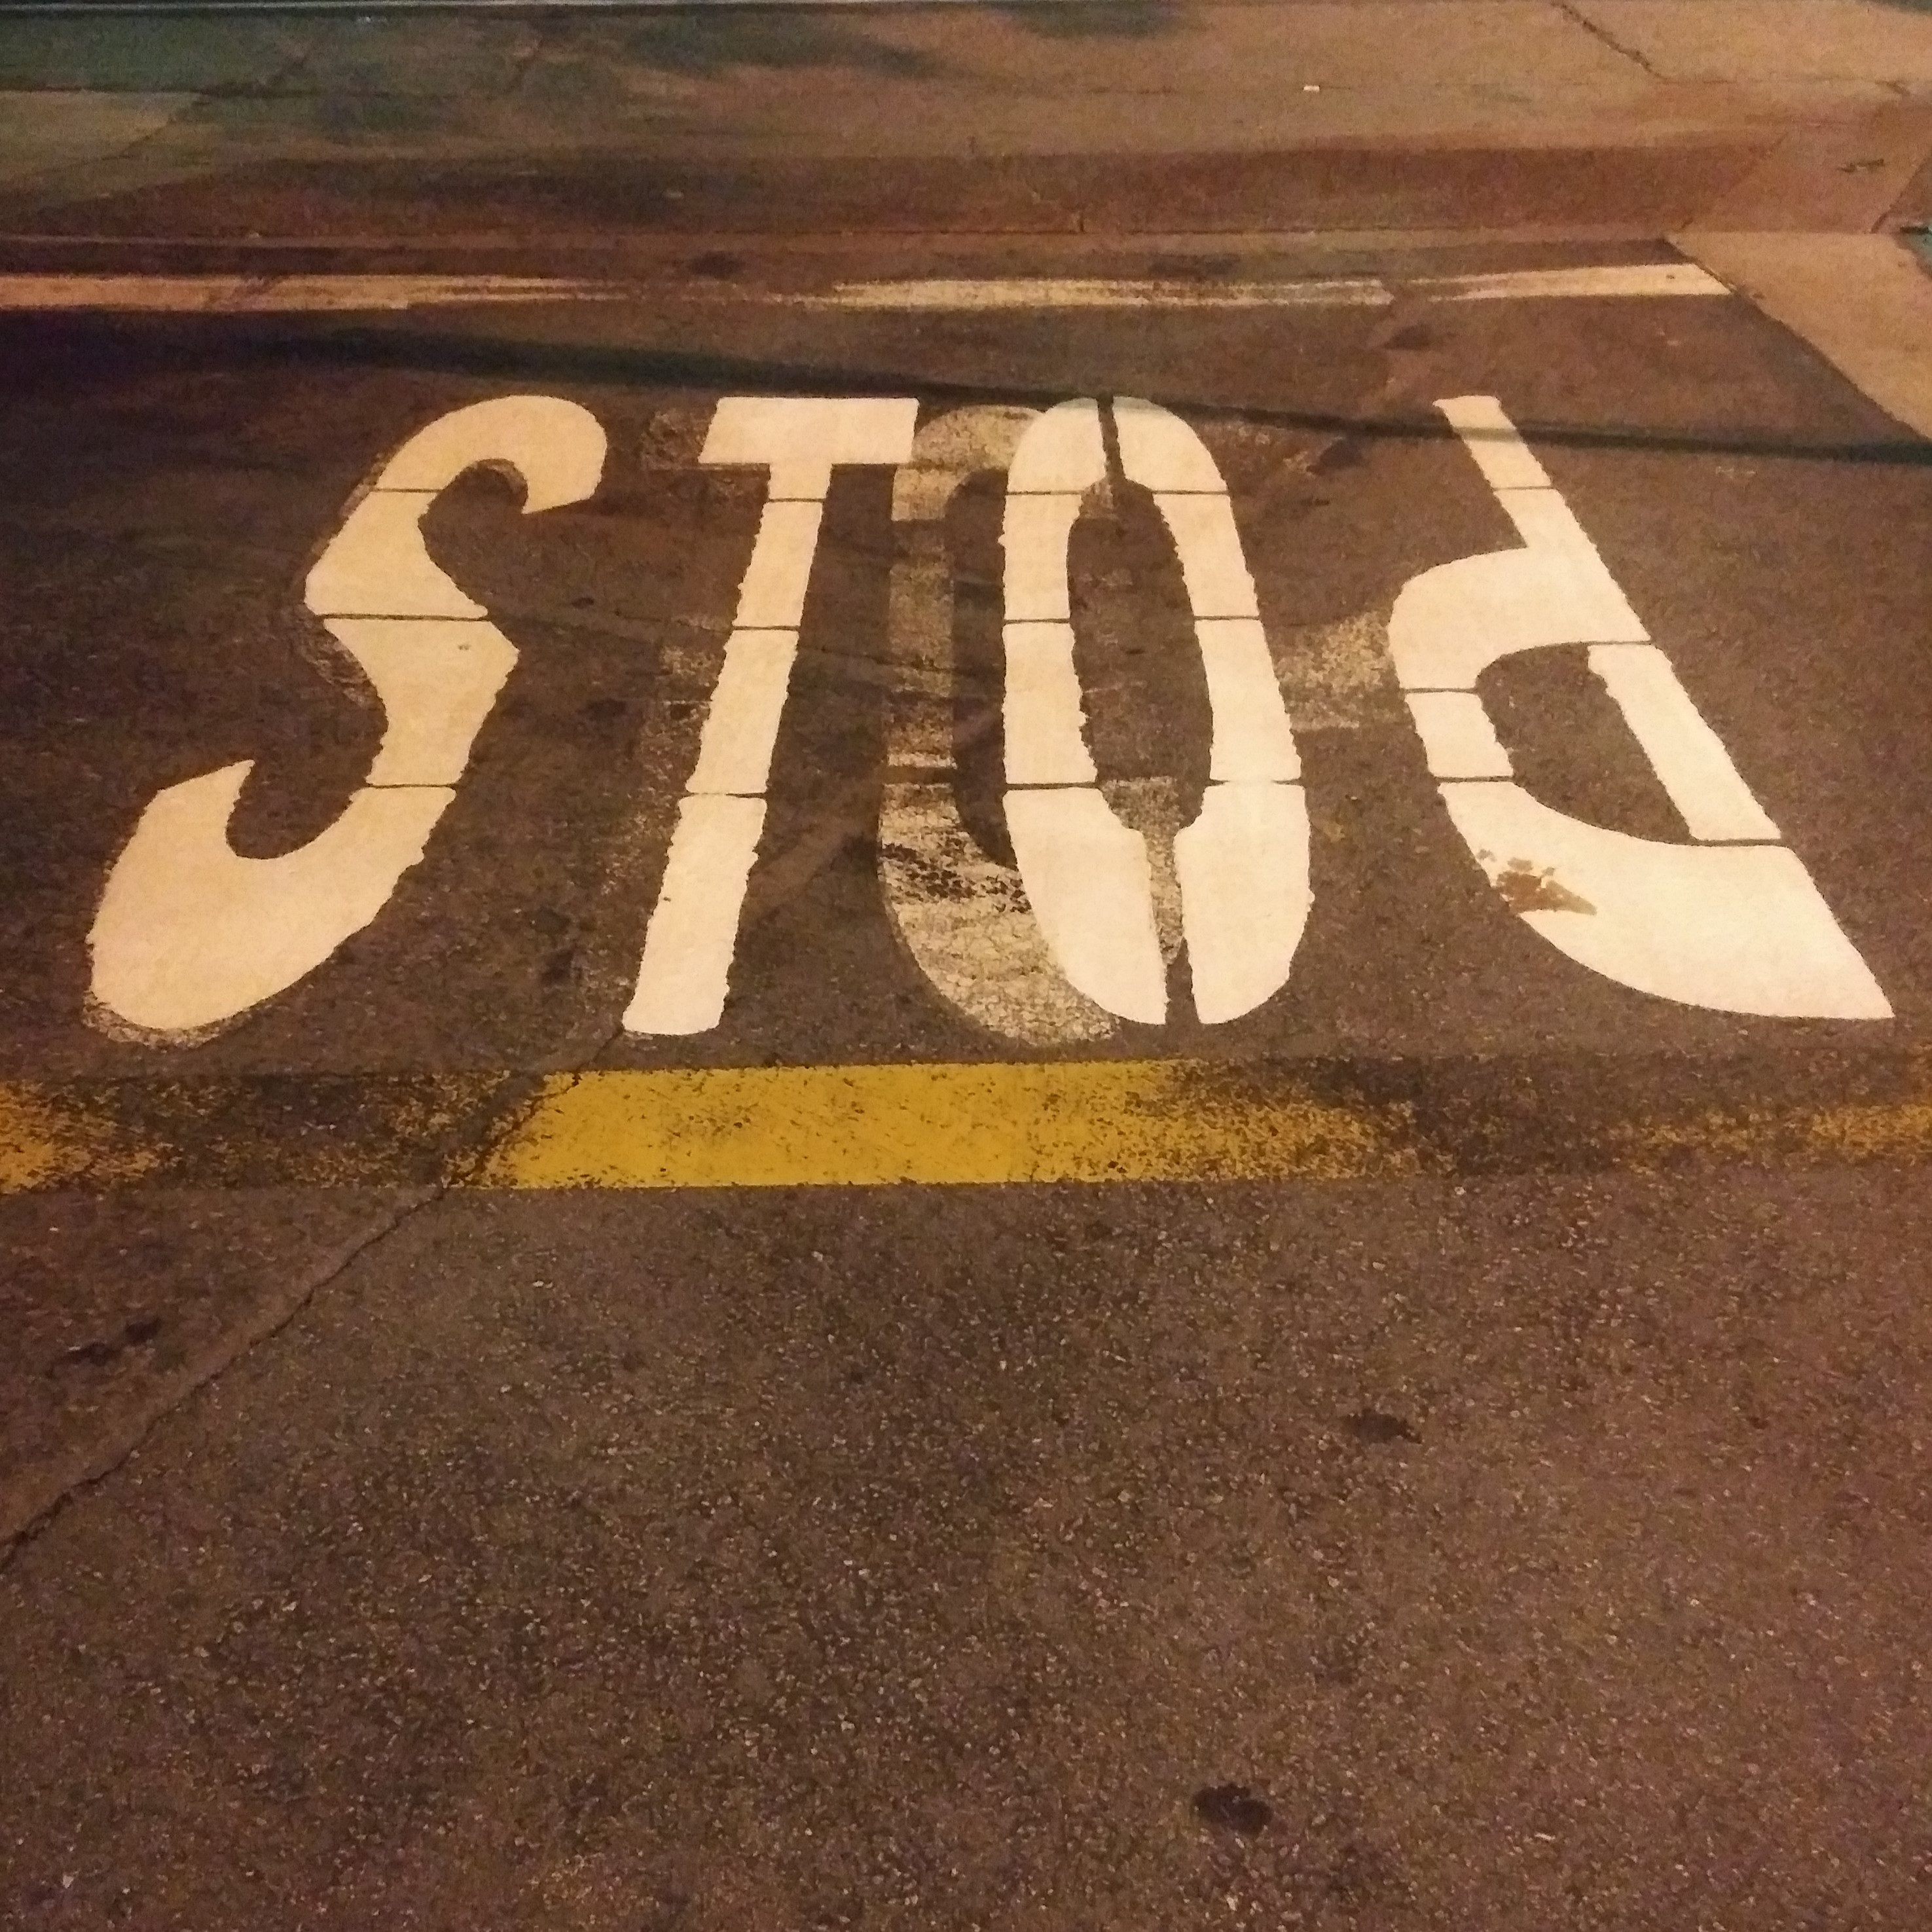 It seems like someone doesn't know how to spell STOP. Upon exiting a parking lot off of SAFEWAY, I noticed the stop on the ground didn't look right. Instead of spelling stop it was spelled stod. So, the p is now a d.